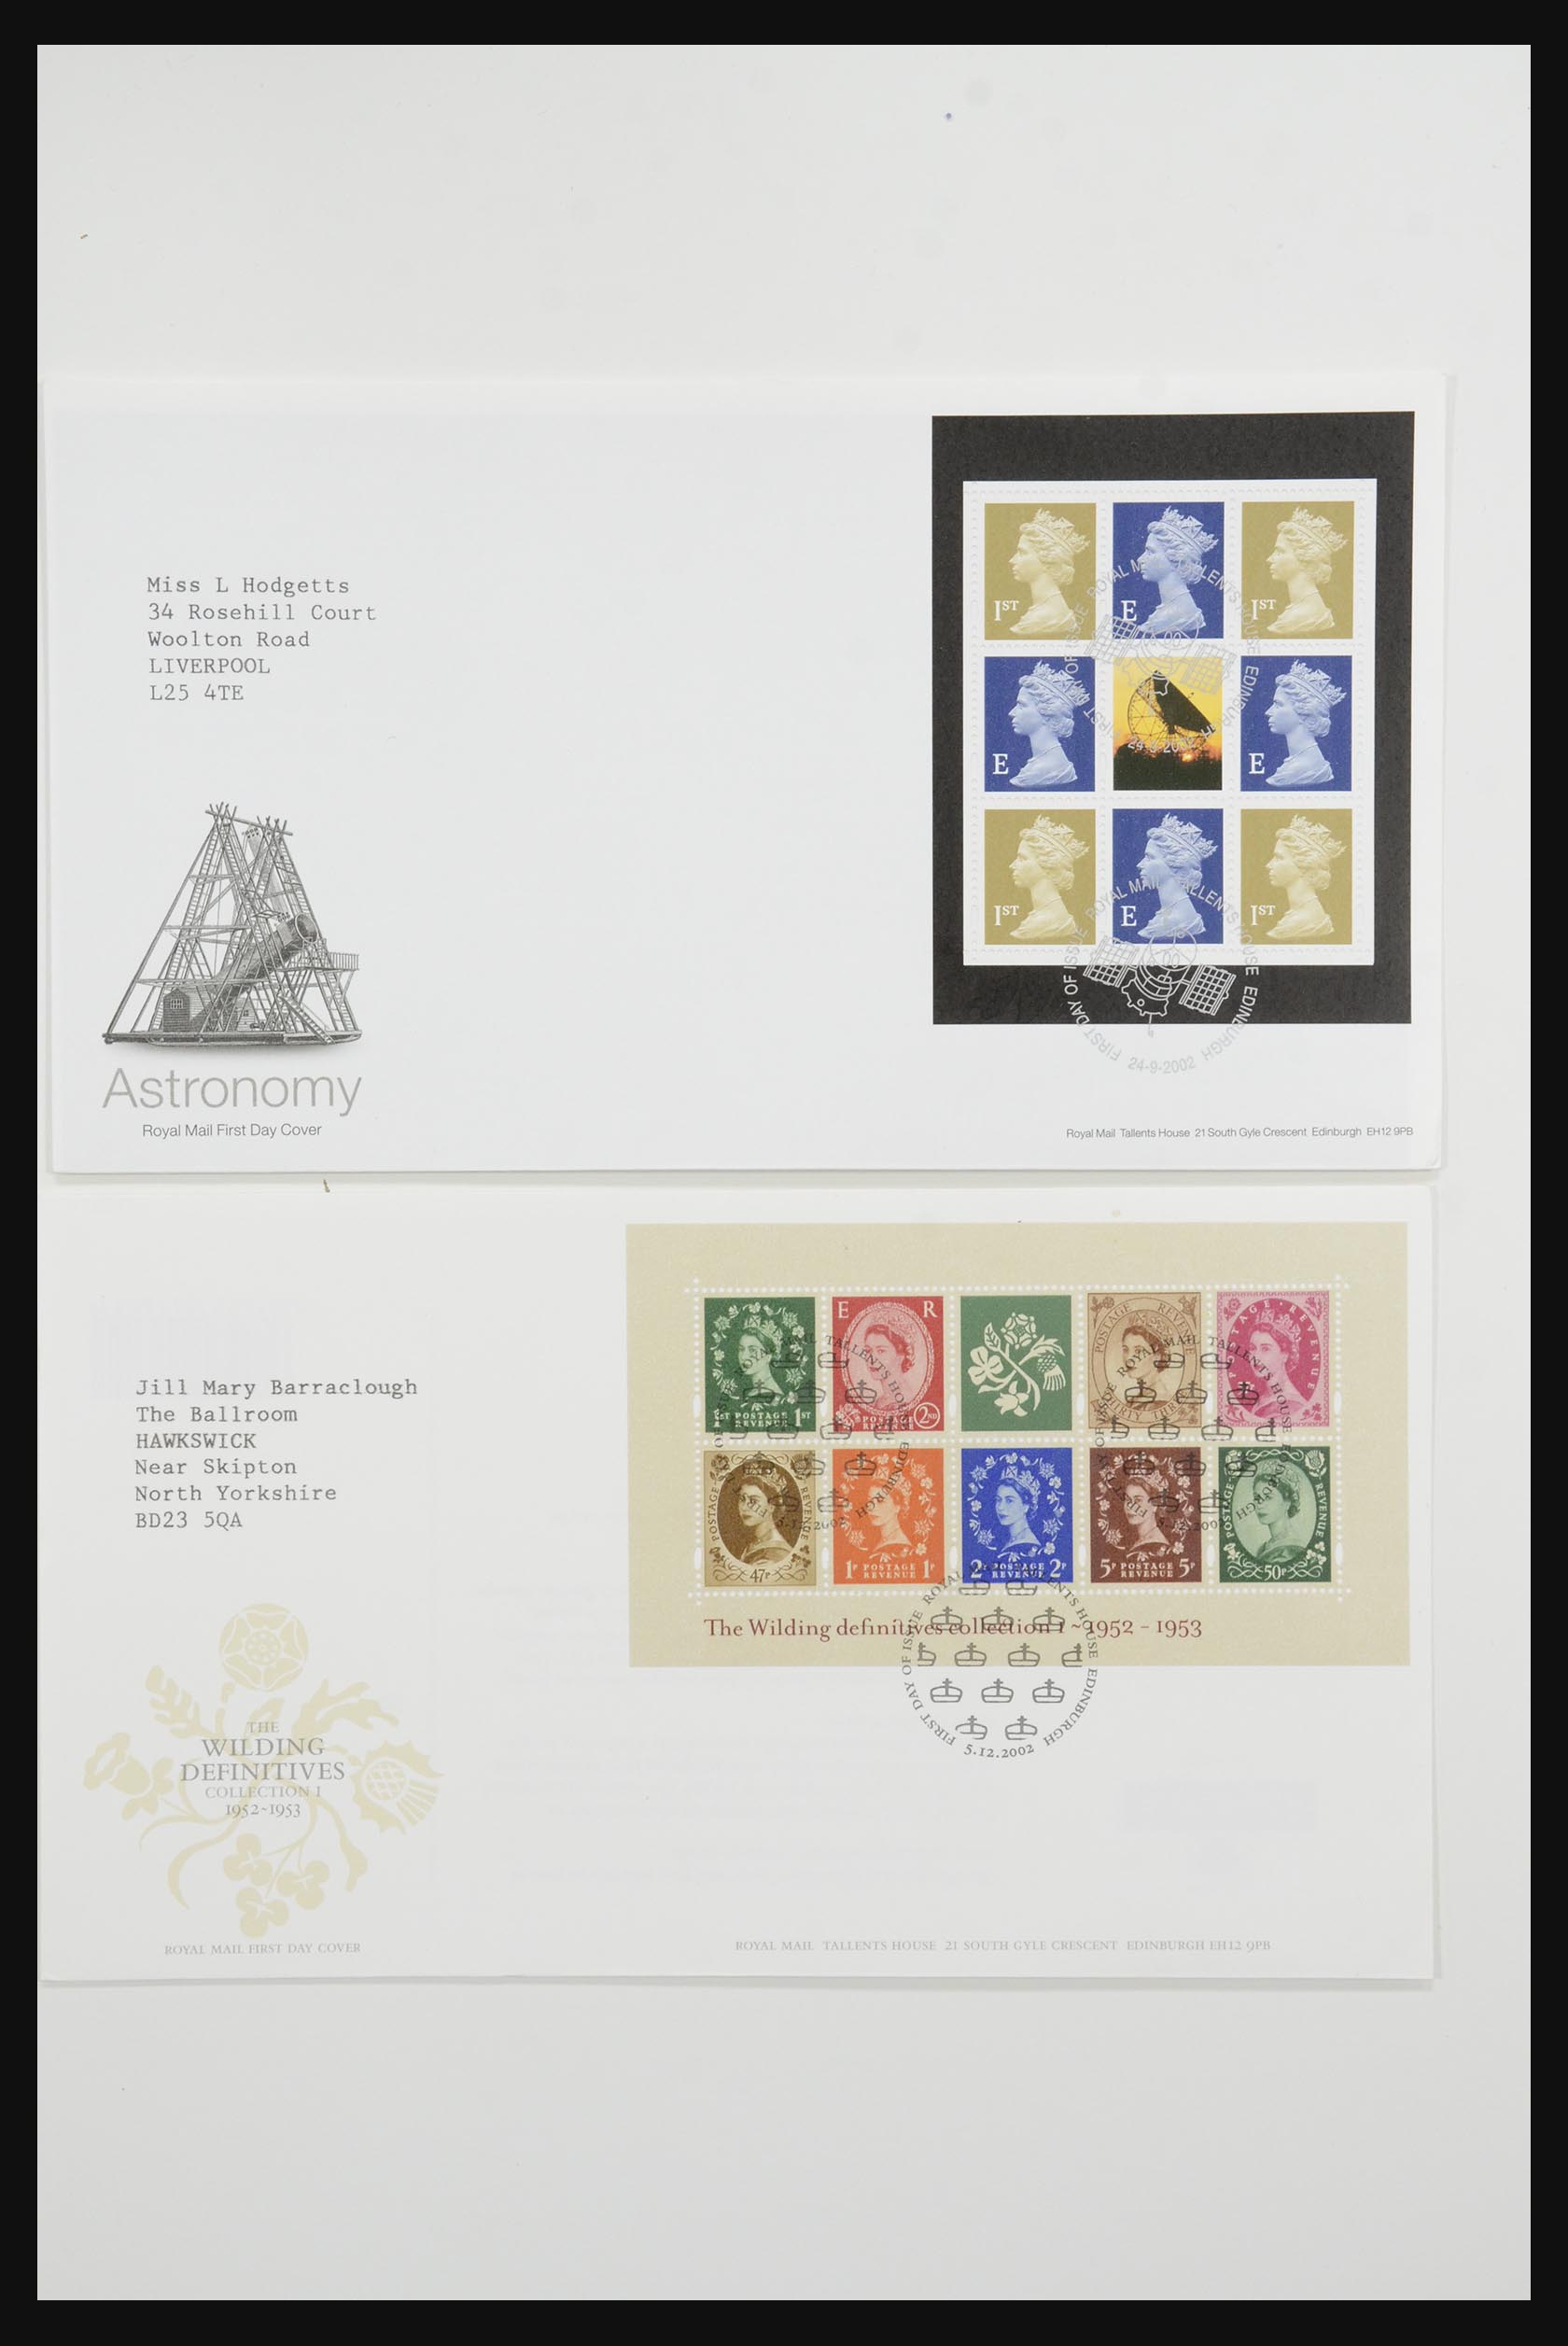 31832 482 - 31832 Great Britain FDC's 1964-2008.